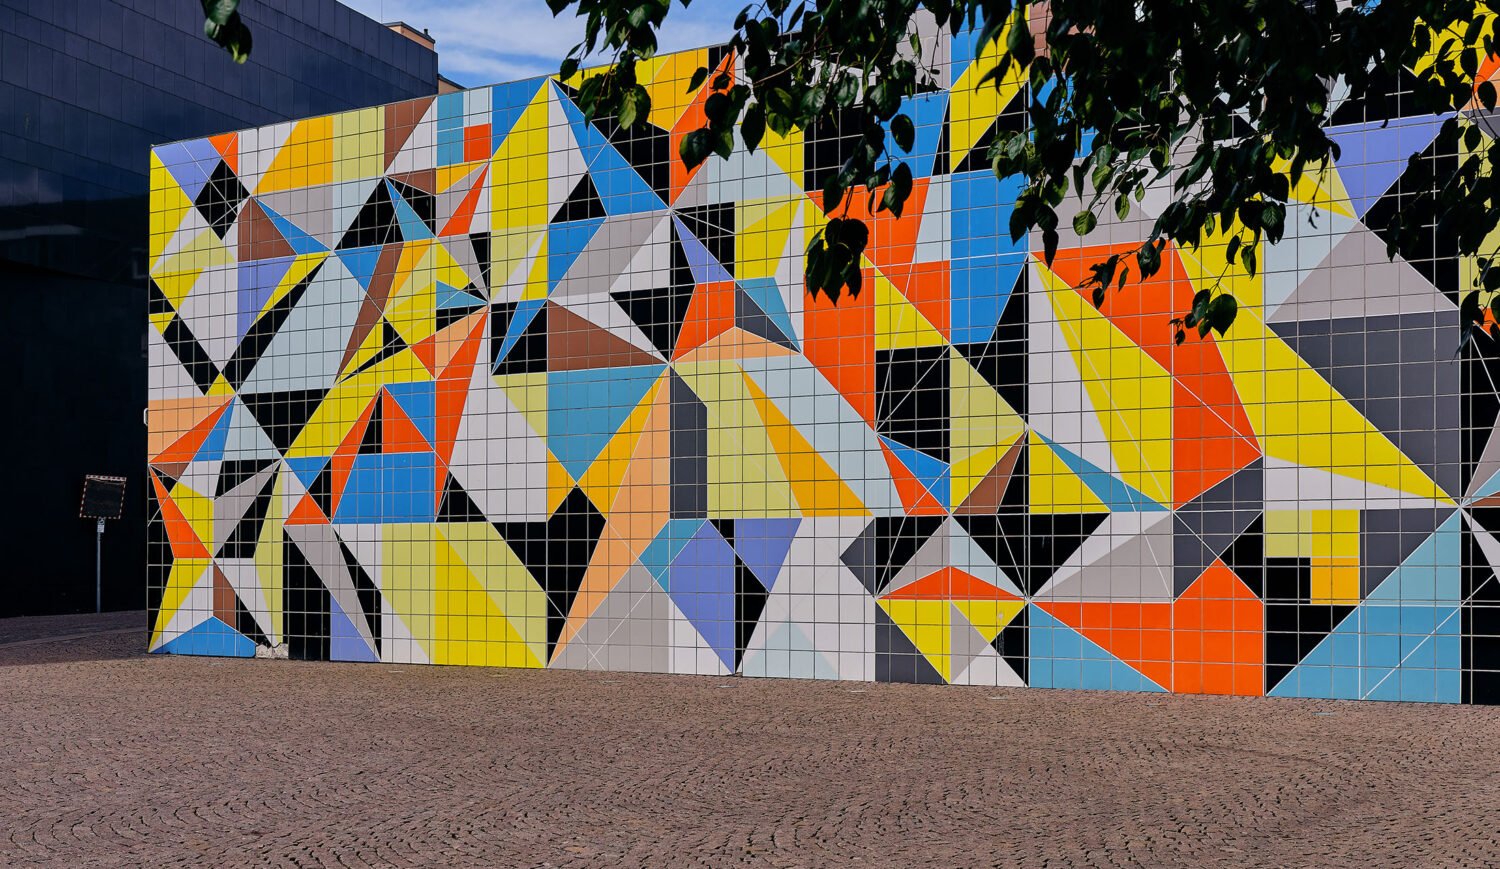 Already on Paul-Klee-Platz, a huge wall mosaic by artist Sarah Morris welcomes visitors to the K20